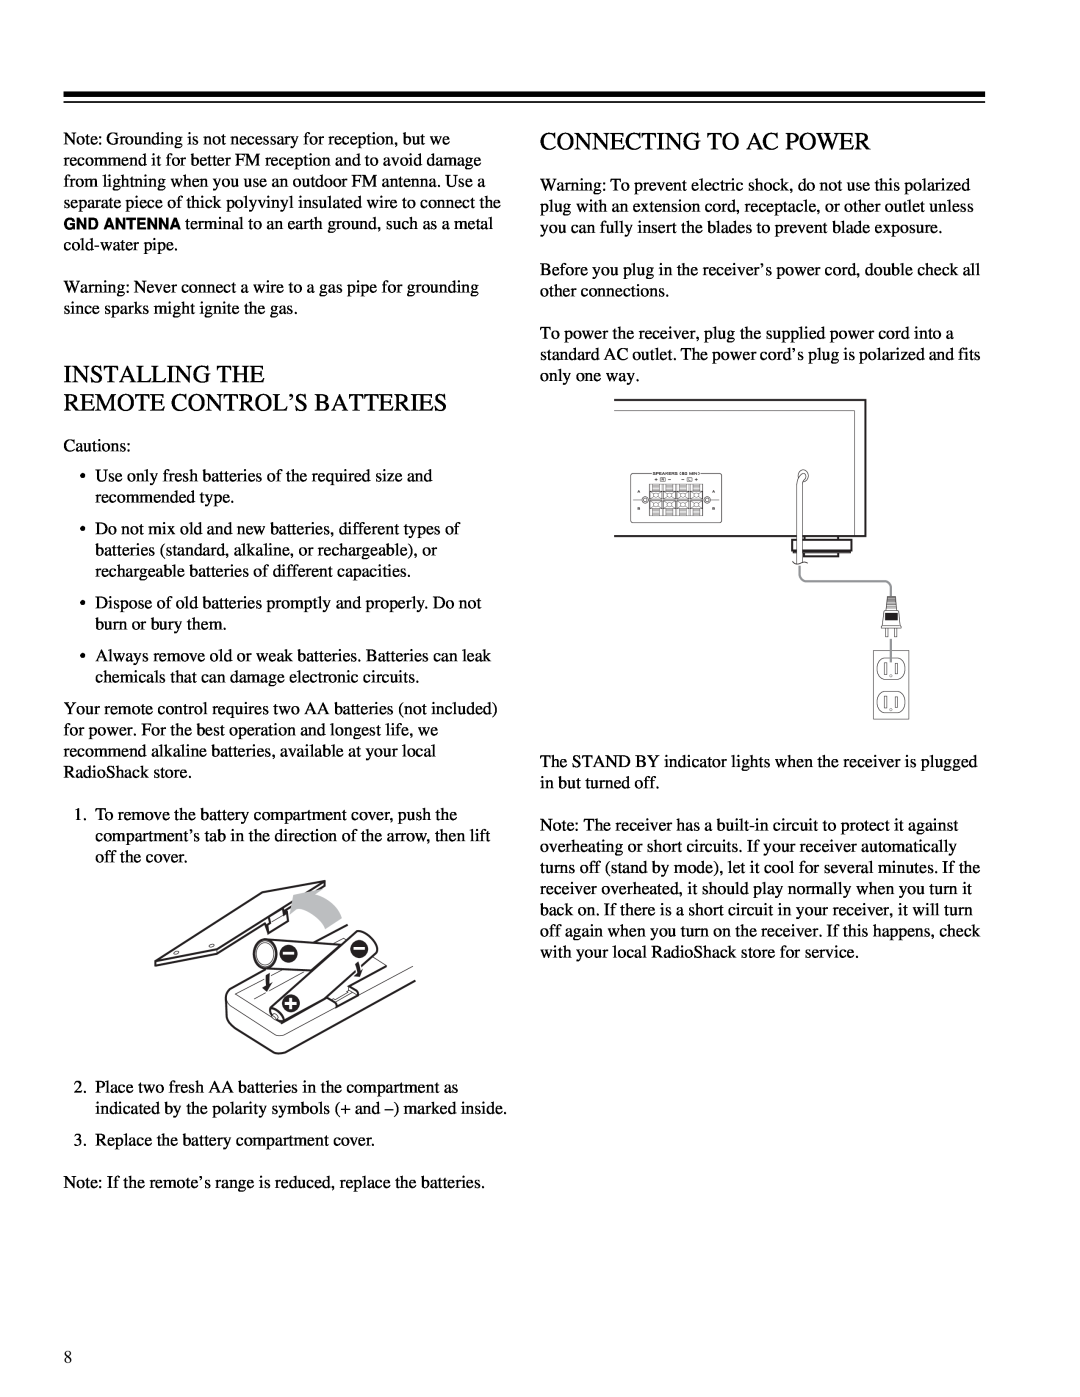 RCA STA-3850 owner manual Installing The Remote Control’S Batteries, Connecting To Ac Power 